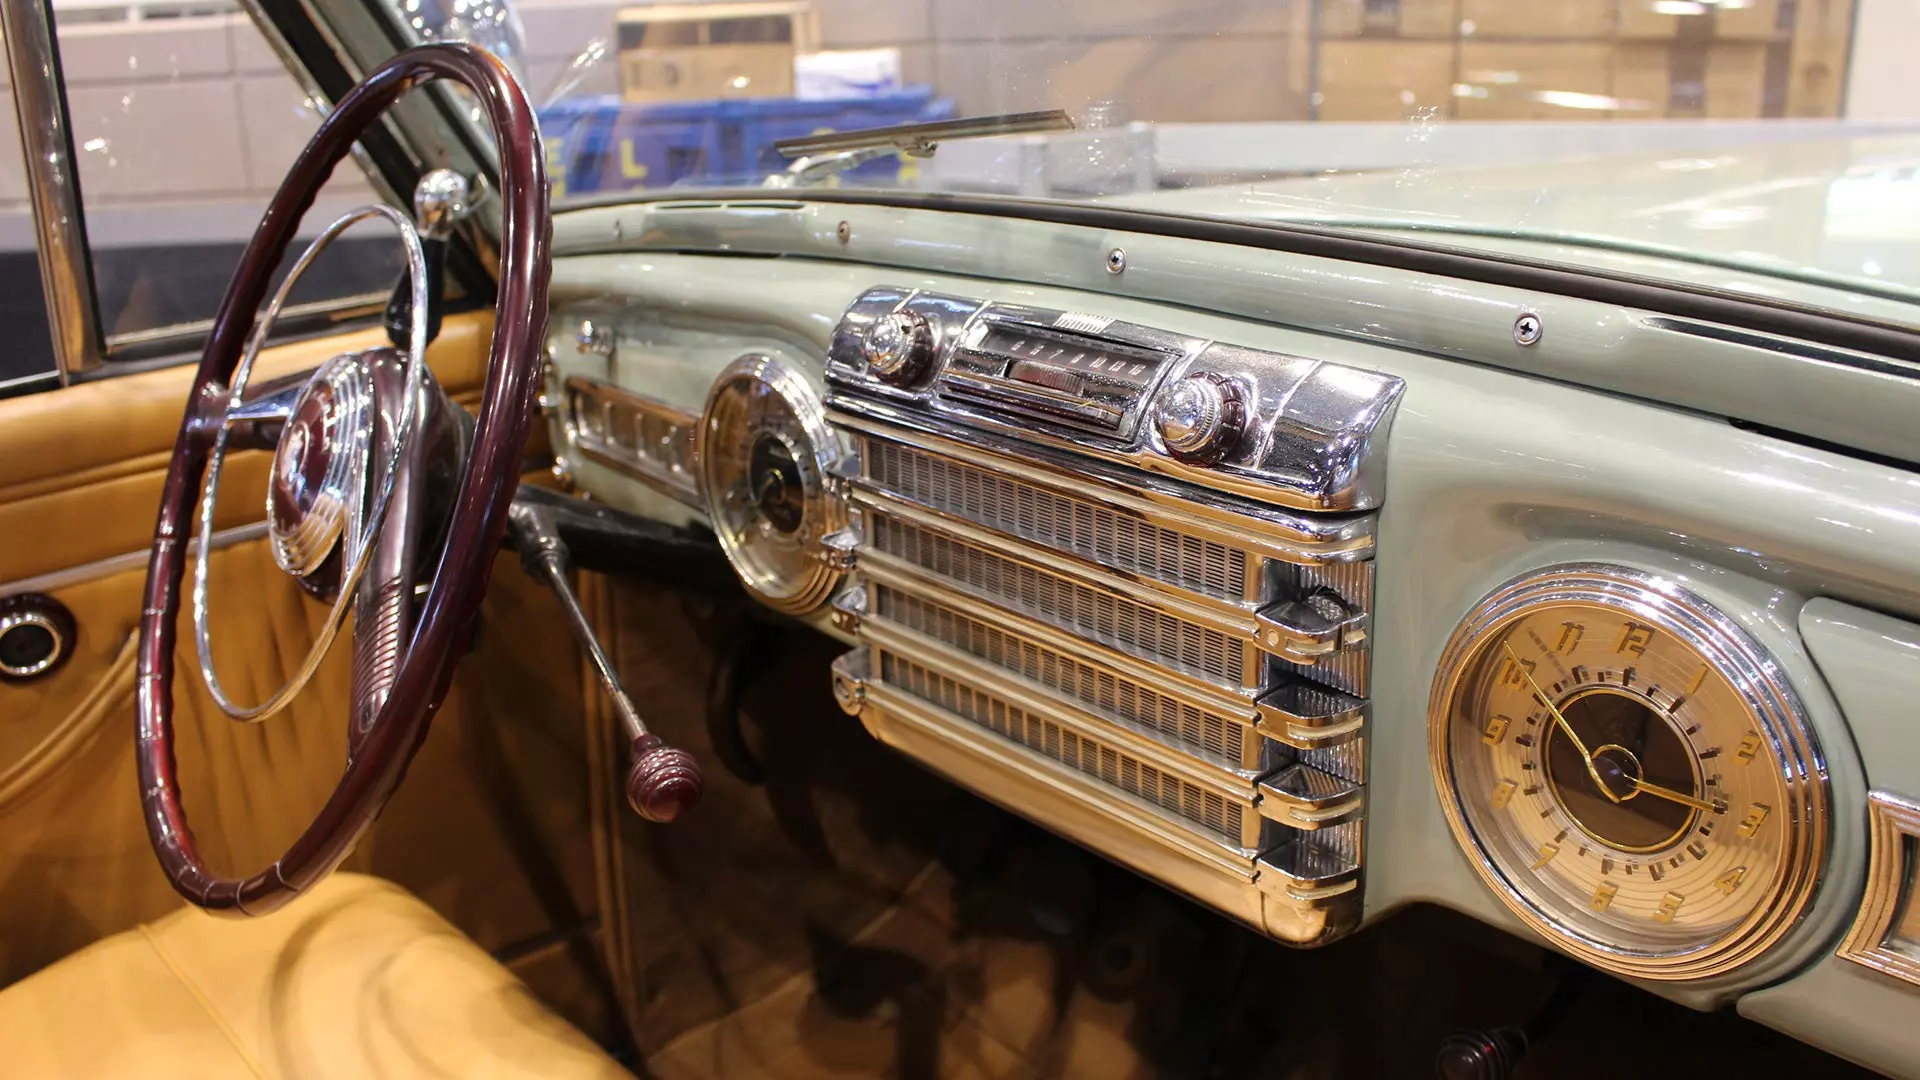 Cars Used To Have Real Clocks, Not Just Watches, on the Dash